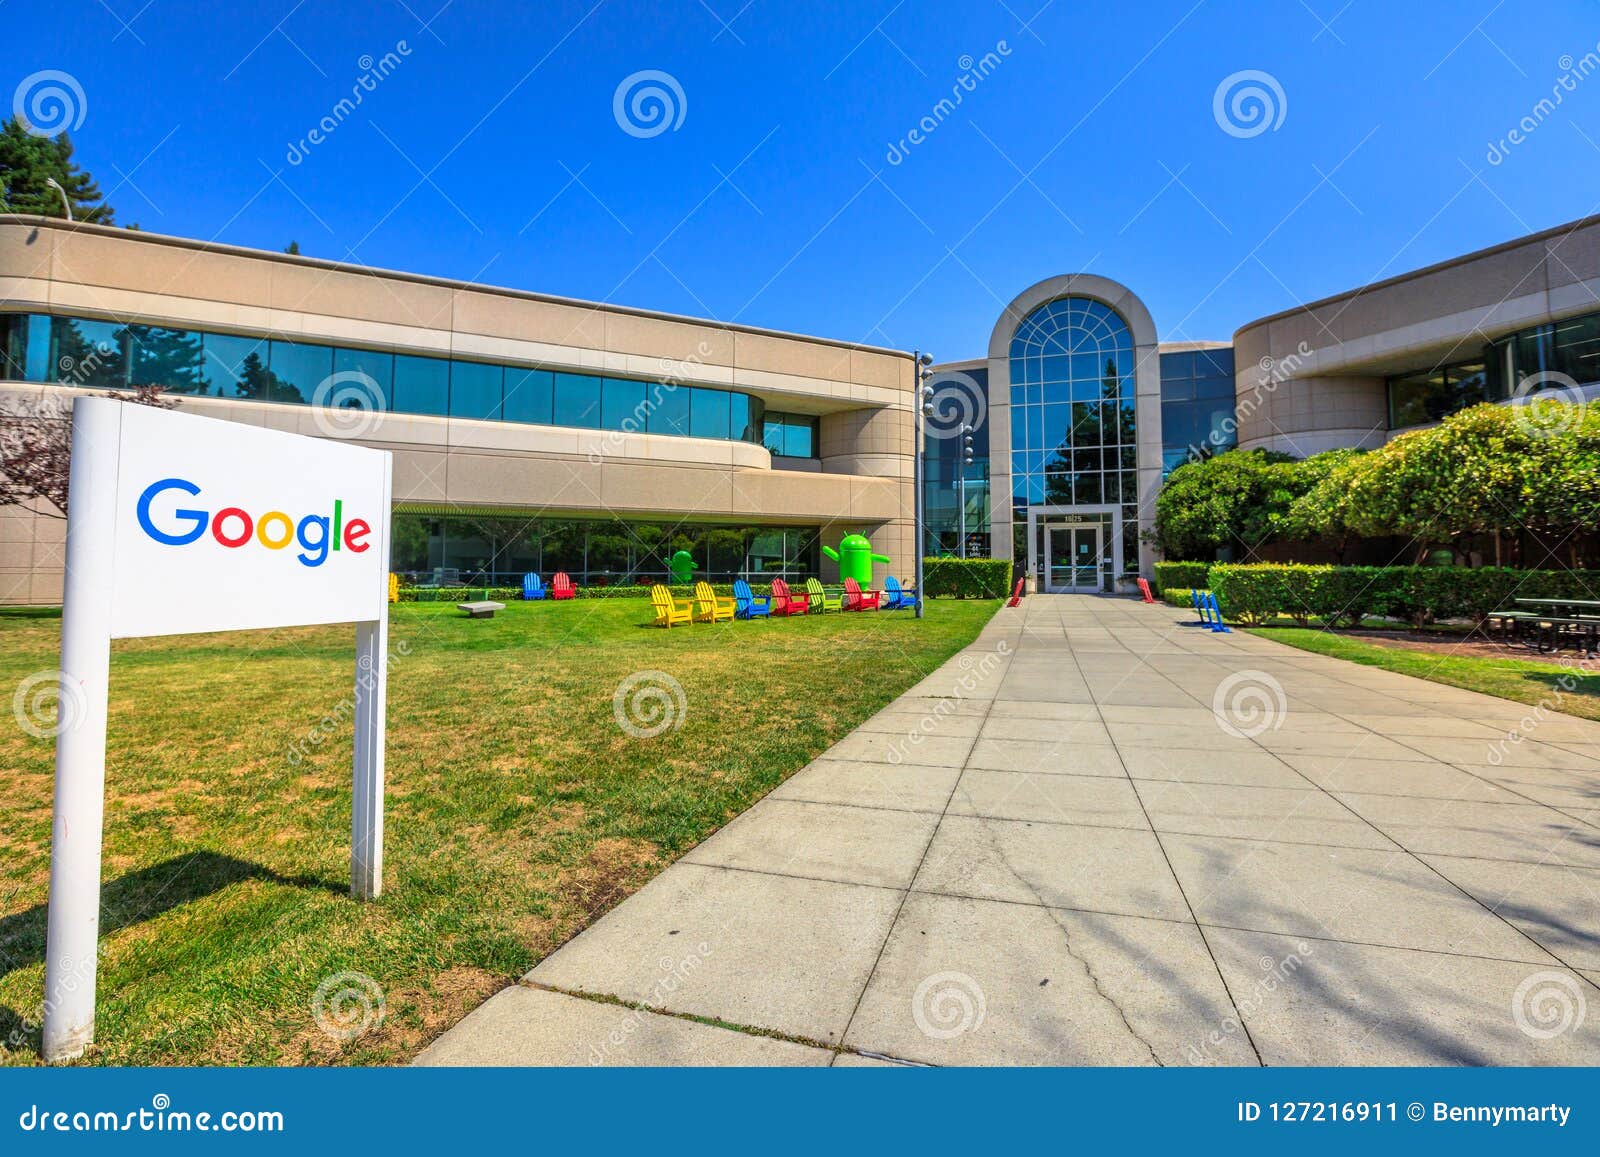 Google Campus Mountain View Editorial Photo   Image of search ...